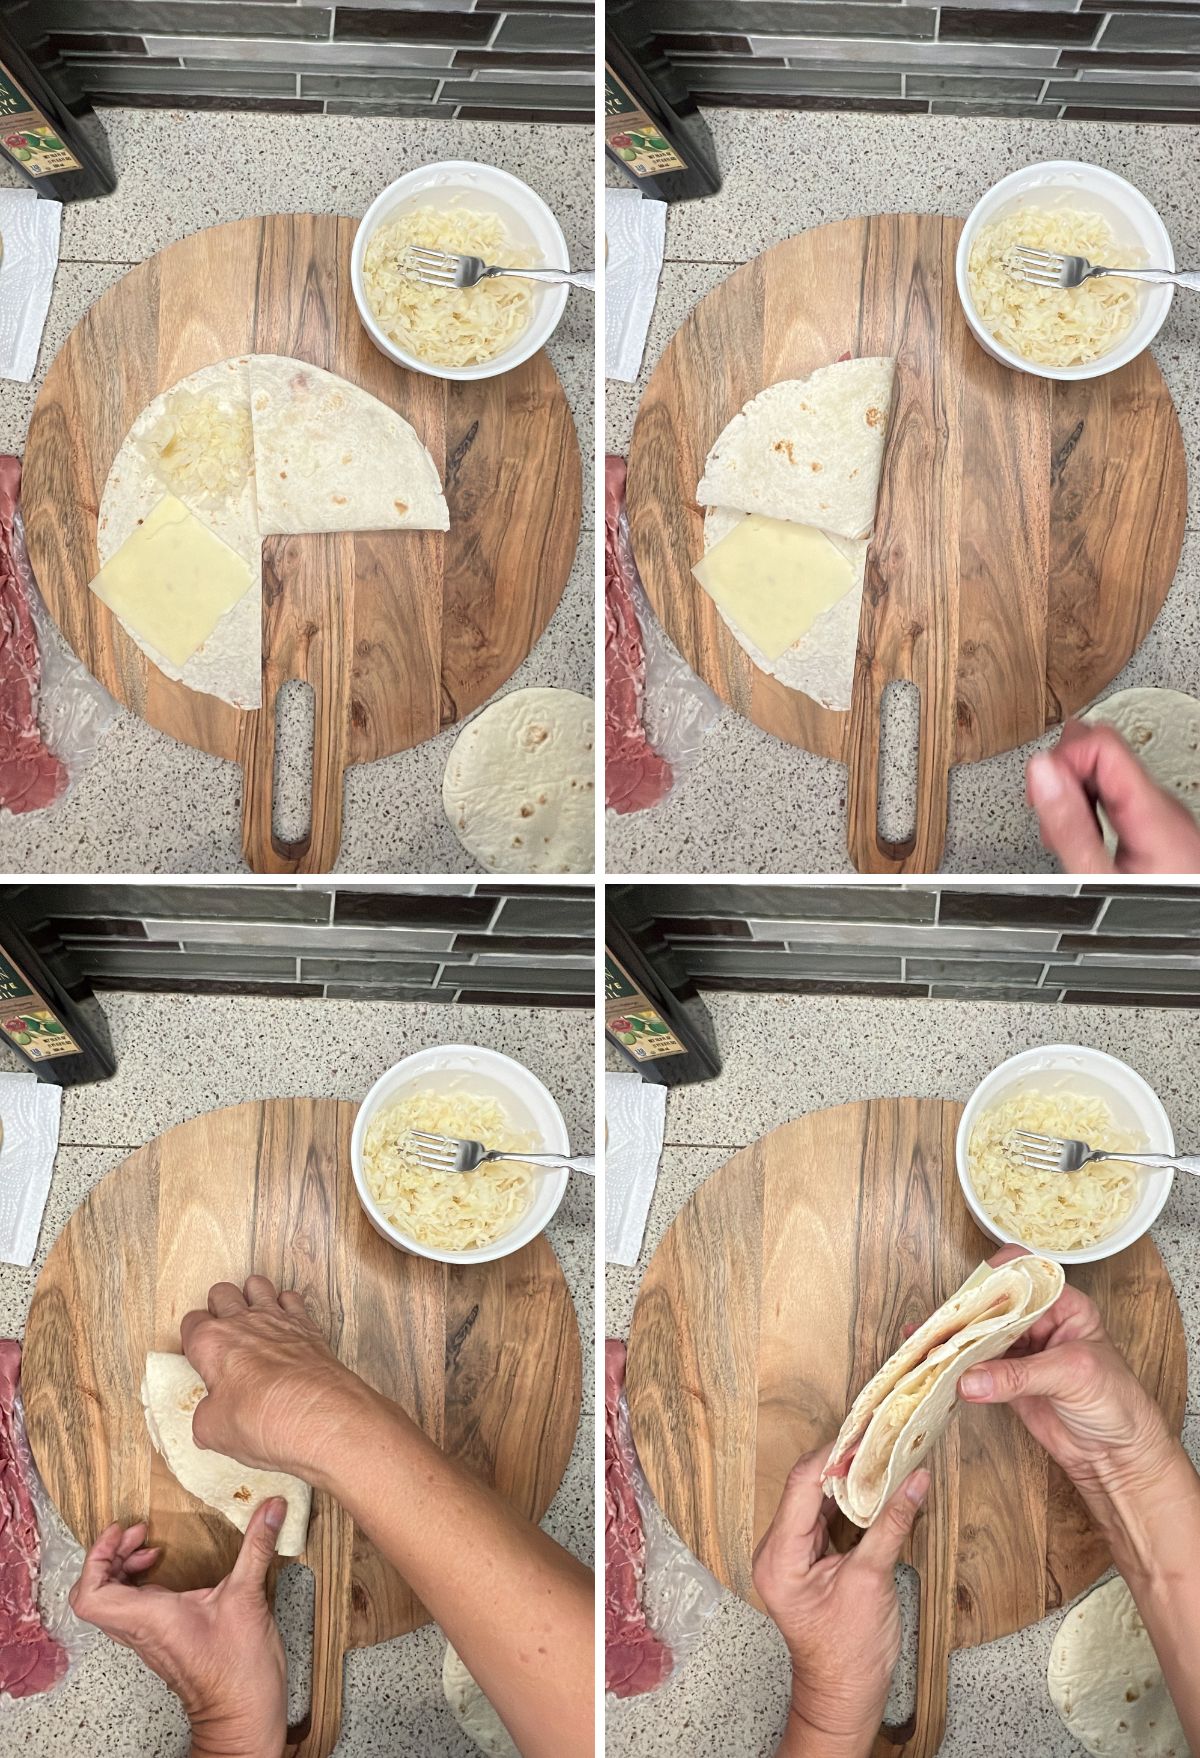 Step-by-step preparation of a quesadilla with cheese filling.